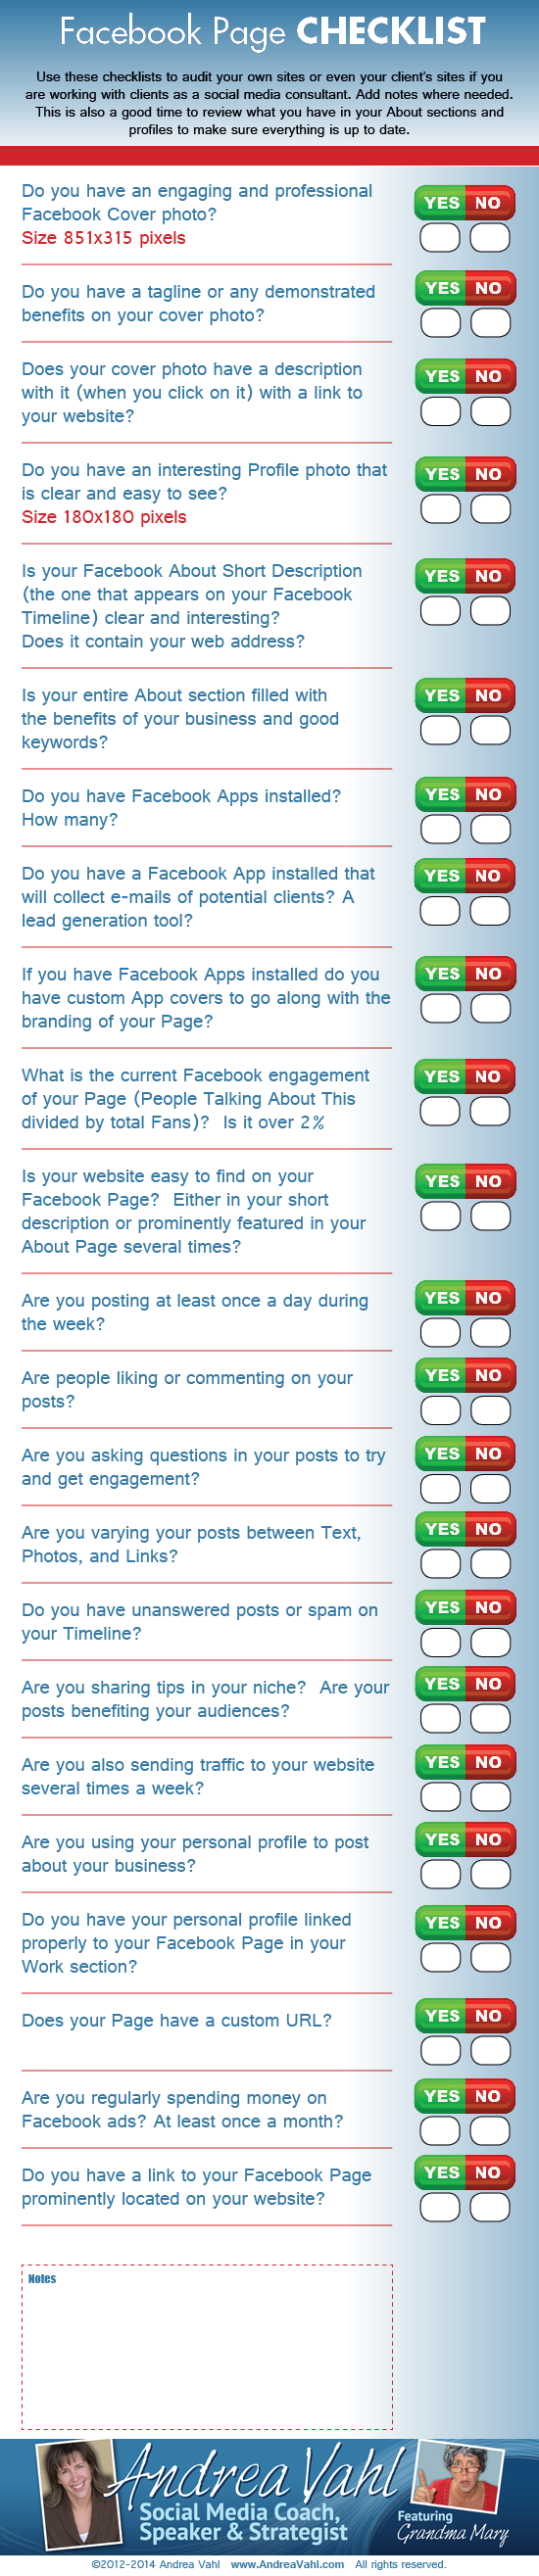 Andrea Vahl's Checklist for Facebook Pages